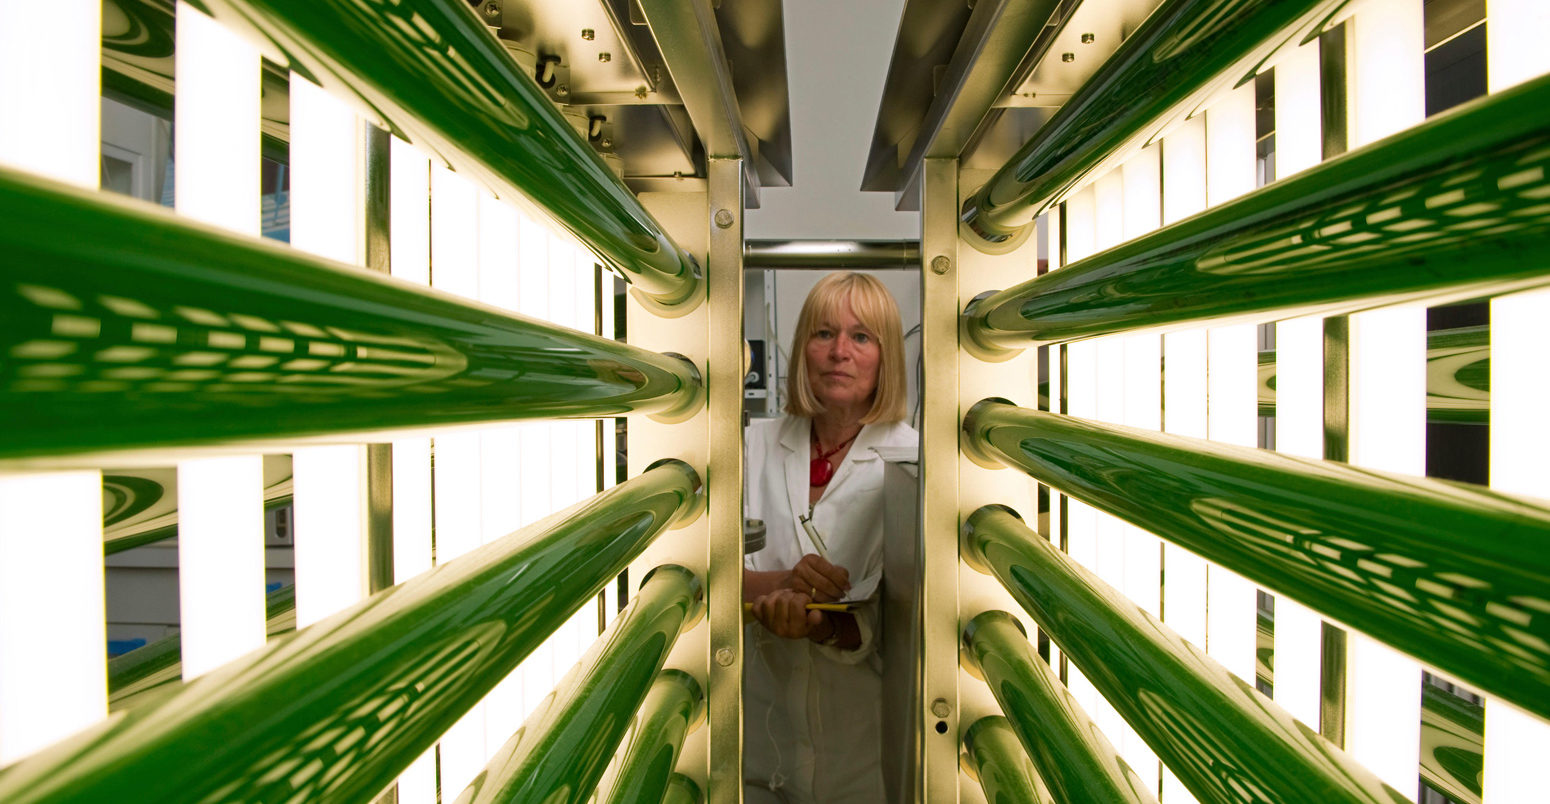 A chemicals assistant inspects the photoreactor for growing of microalgae at Institute for Proceeding of Cereals (IGV) in Bergholz-Rehbruecke, Germany Credit: dpa picture alliance archive / Alamy Stock Photo